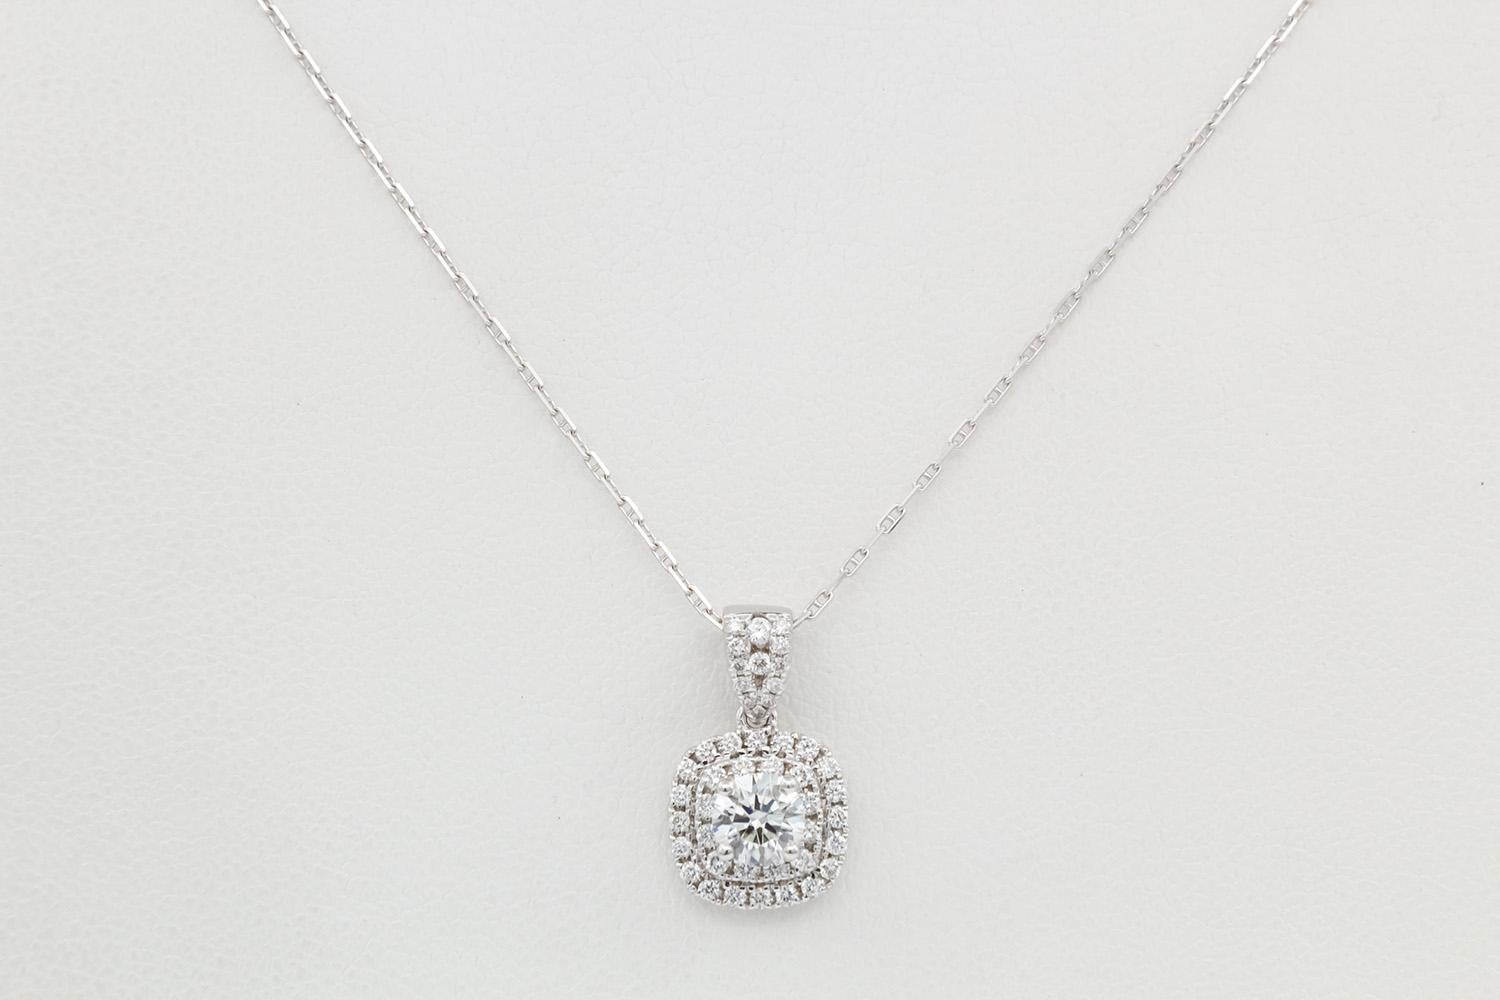 We are pleased to present this Ladies GIA Certified 18k White Gold & Round Brilliant Diamond Pendant Necklace 0.85ctw. This cute piece features a GIA certified and laser inscribed 0.46ct G/Internally Flawless round brilliant cut diamond set in a 18k